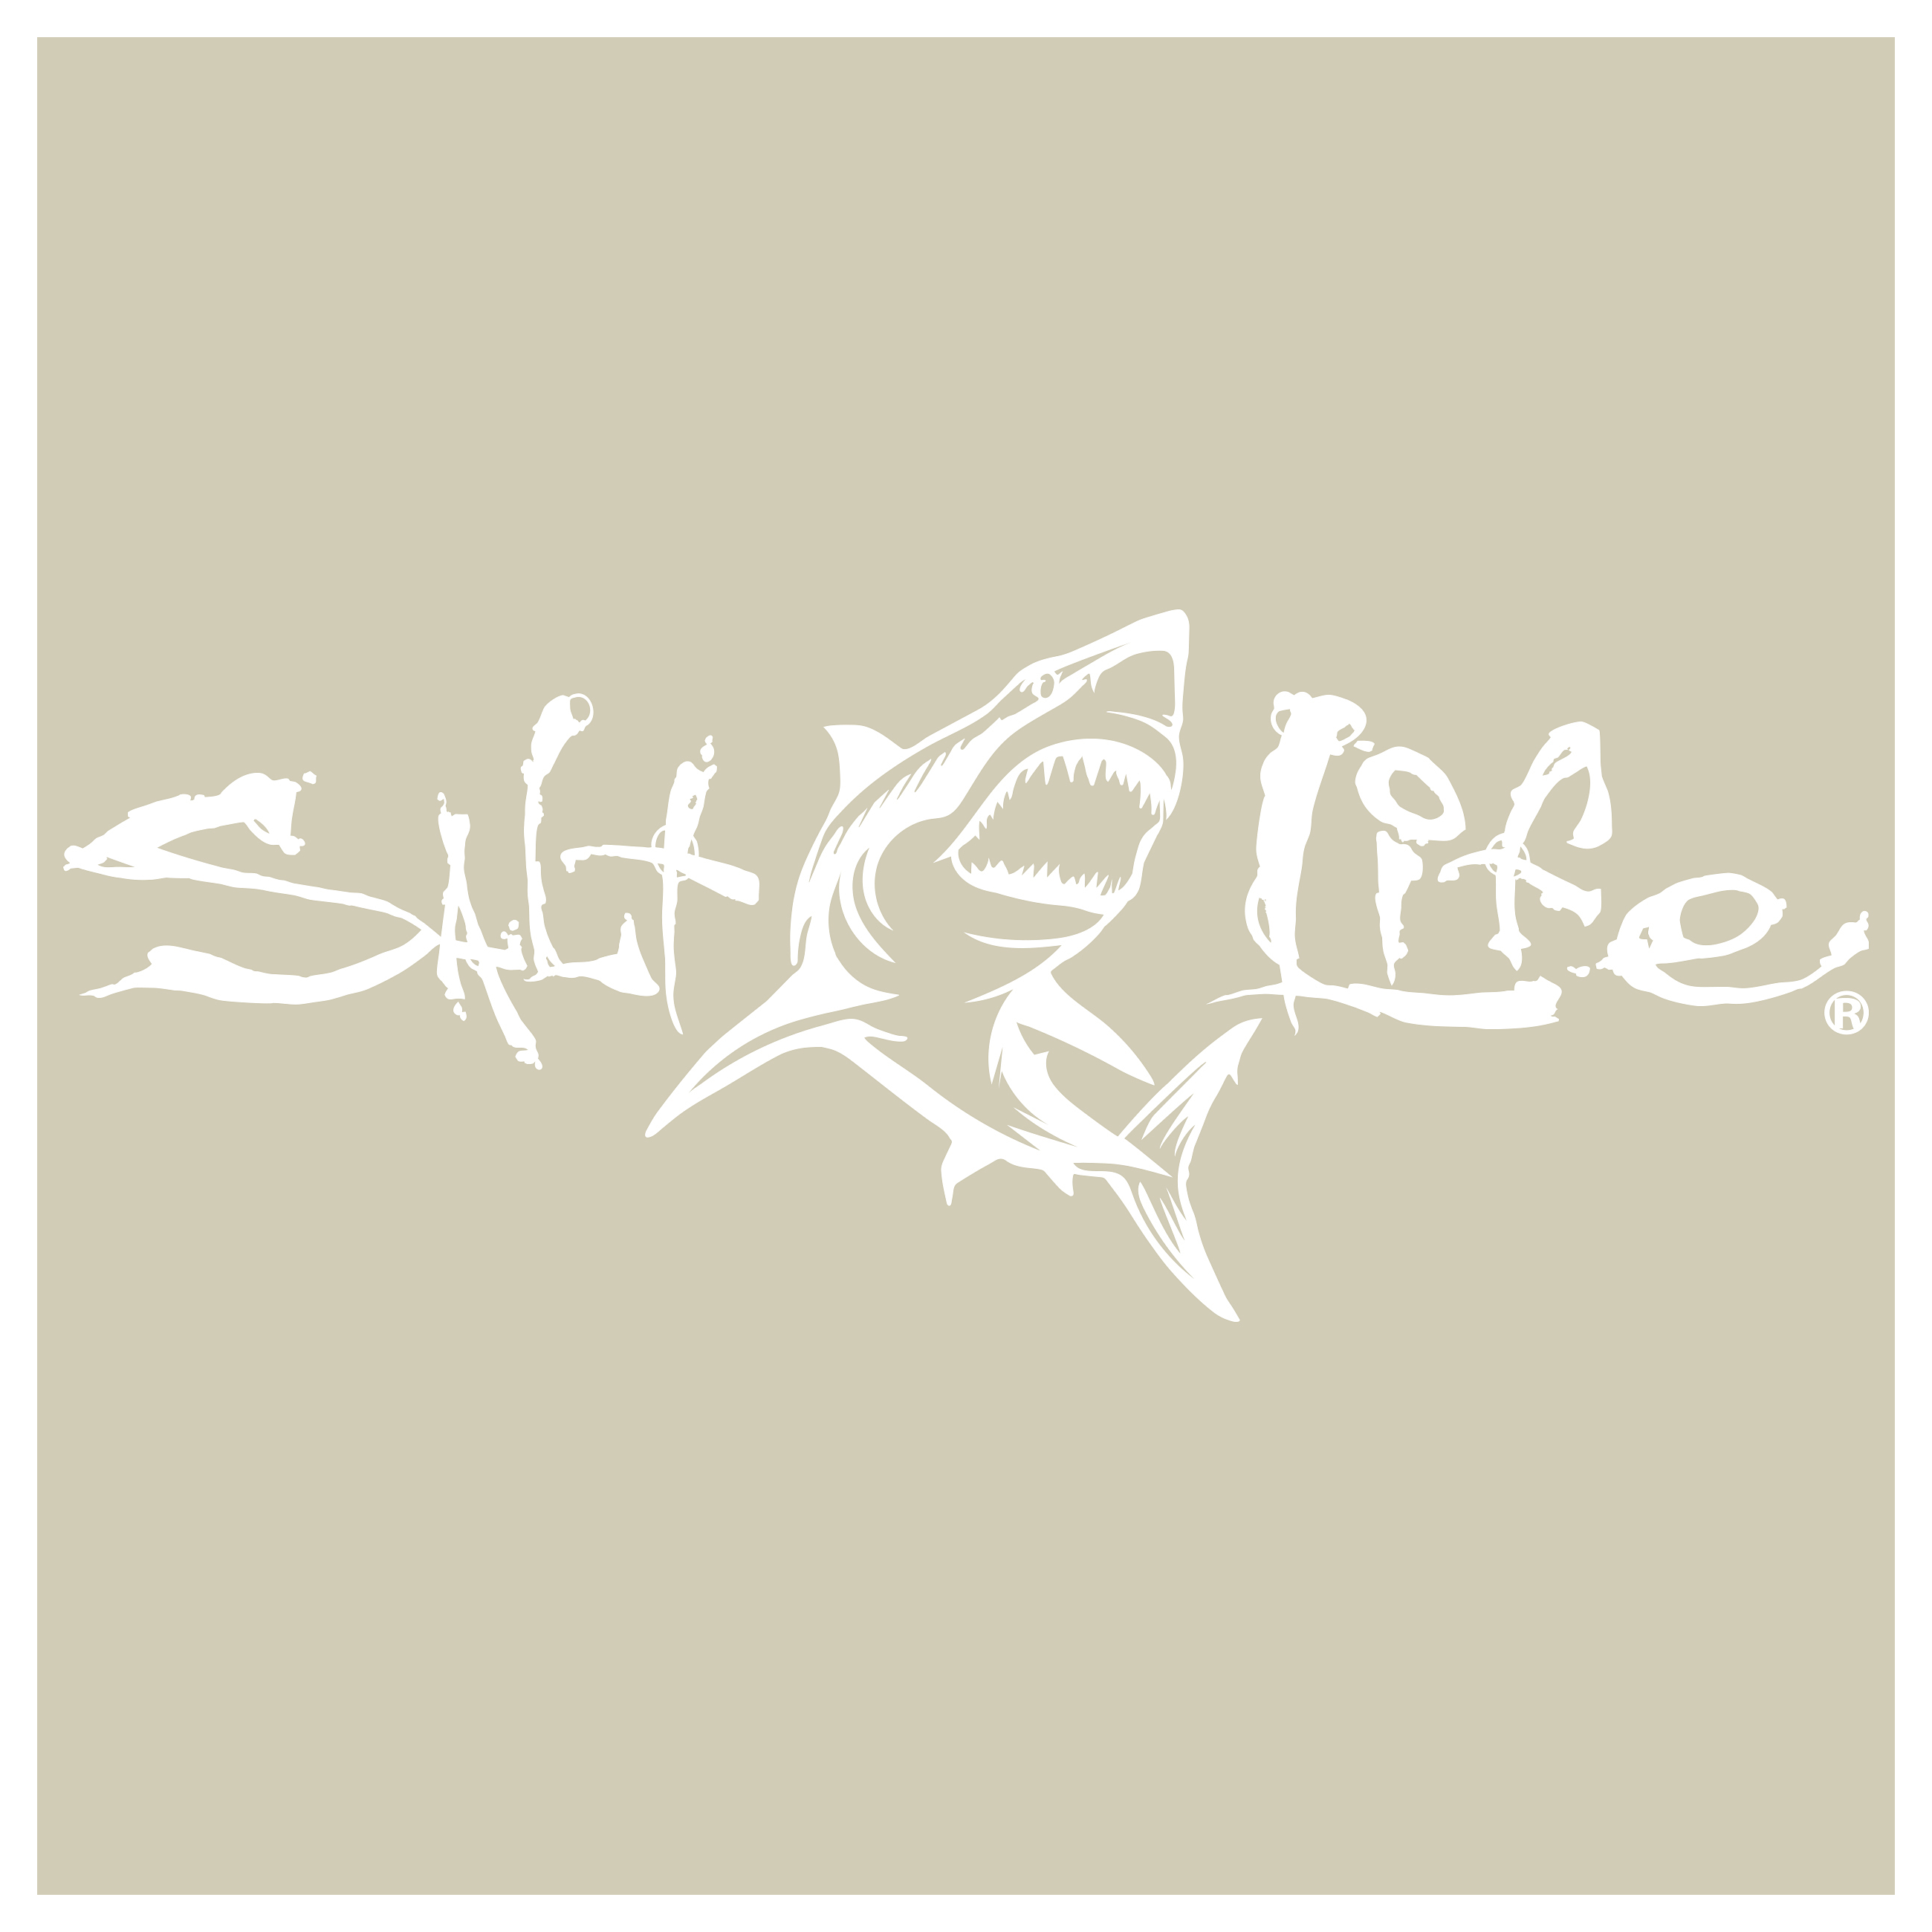 Salt Life Signature Great White Small Decal | Bass Pro Shops